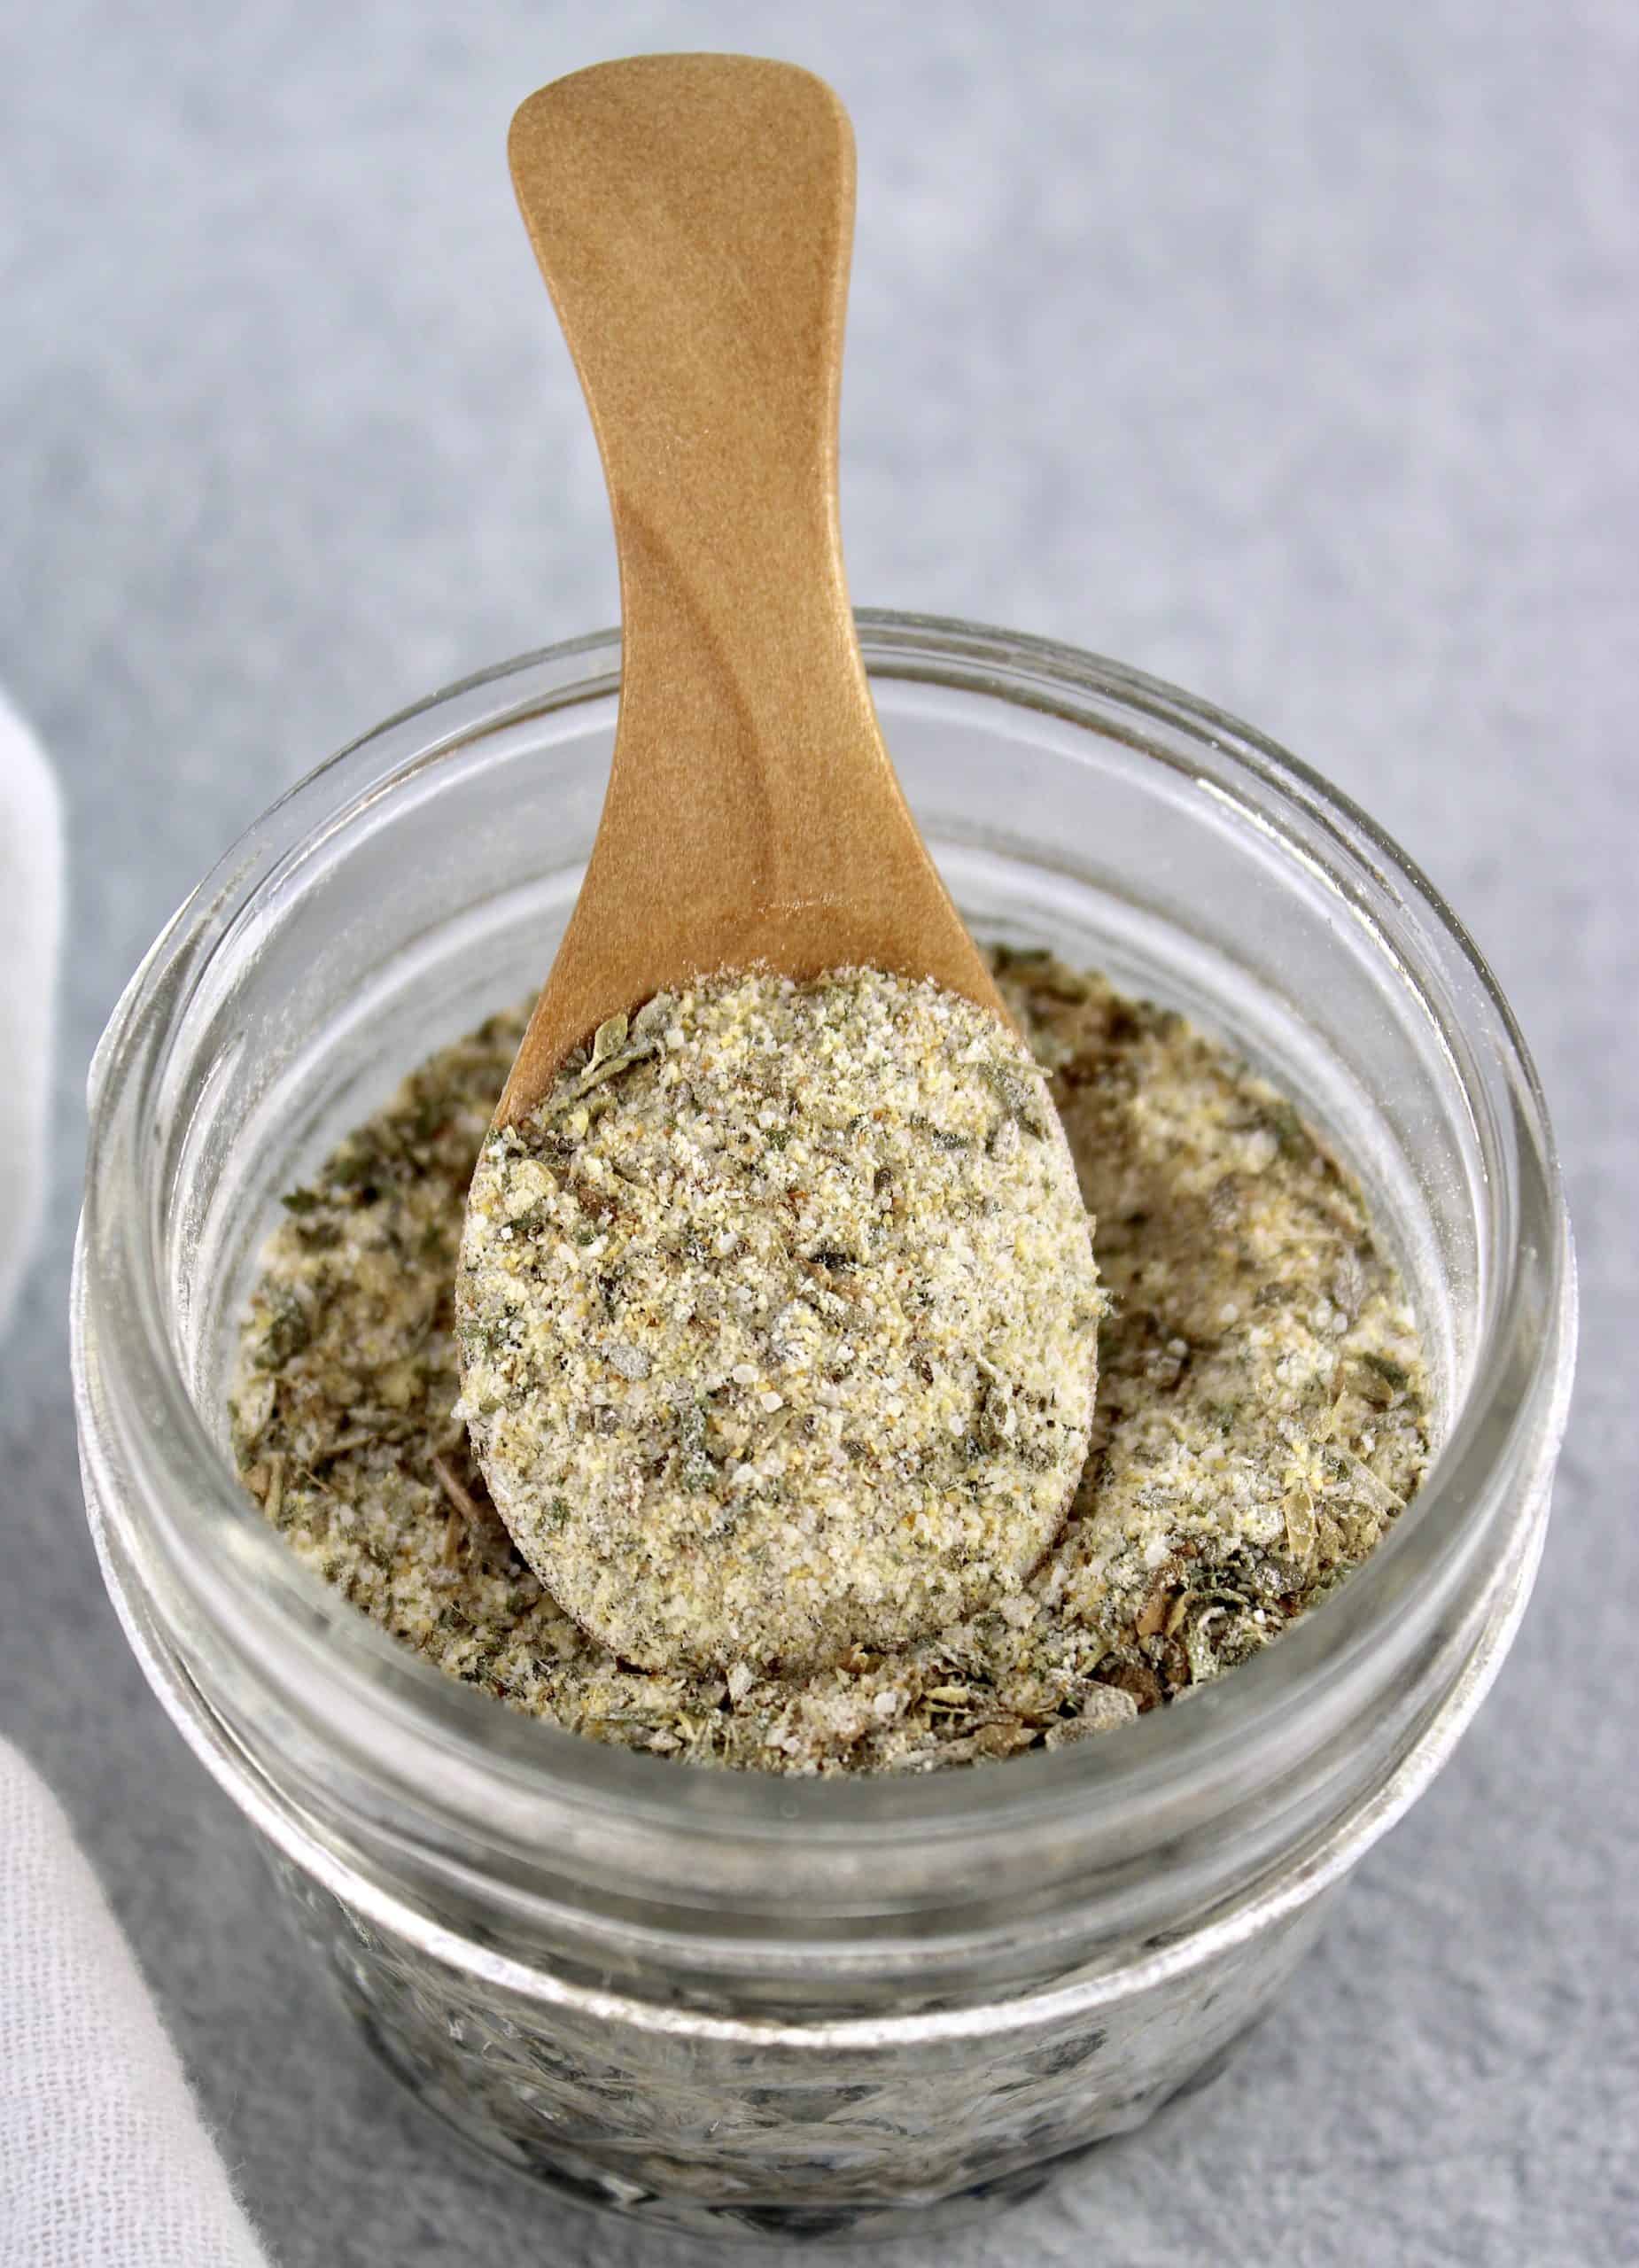 Homemade Italian Dressing Mix being held up by wooden spoon over glass jar